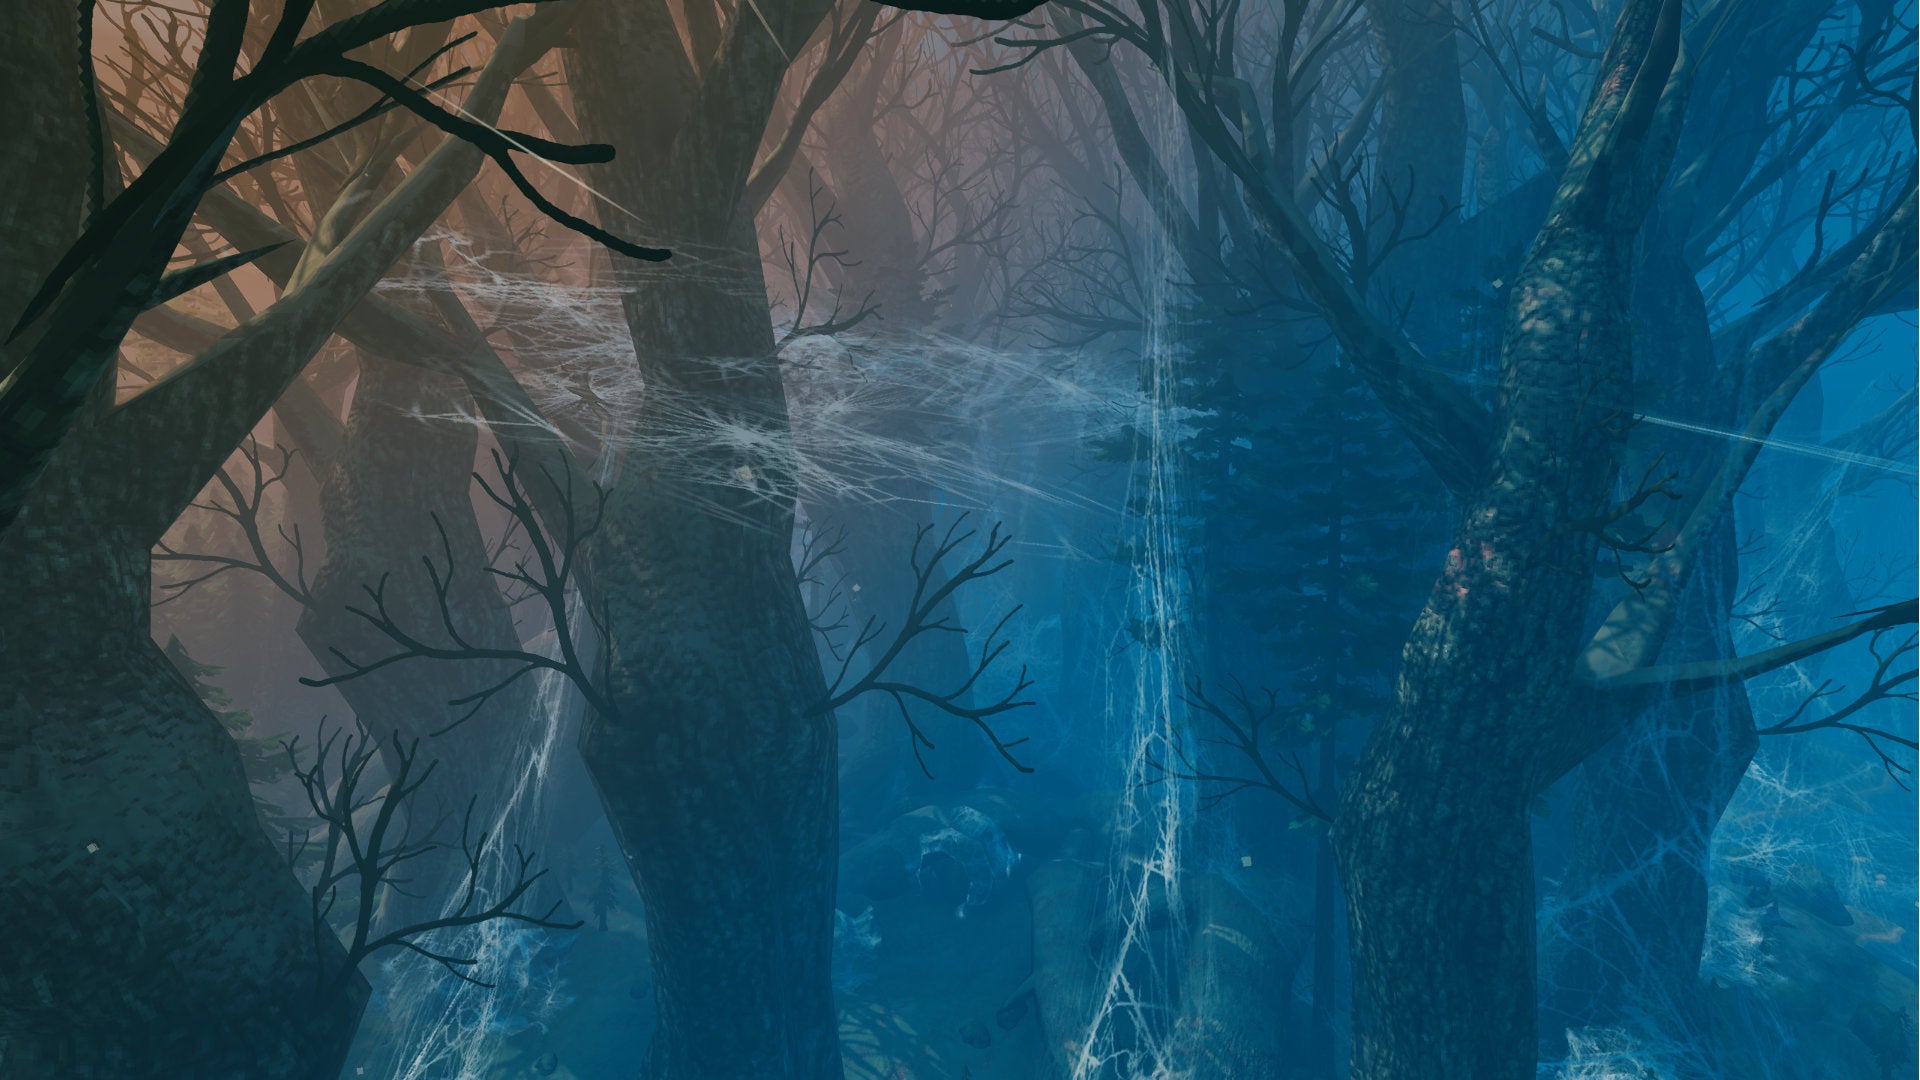 A Valheim screenshot of the Mistlands biome, populated by tall trees and giant cobwebs.